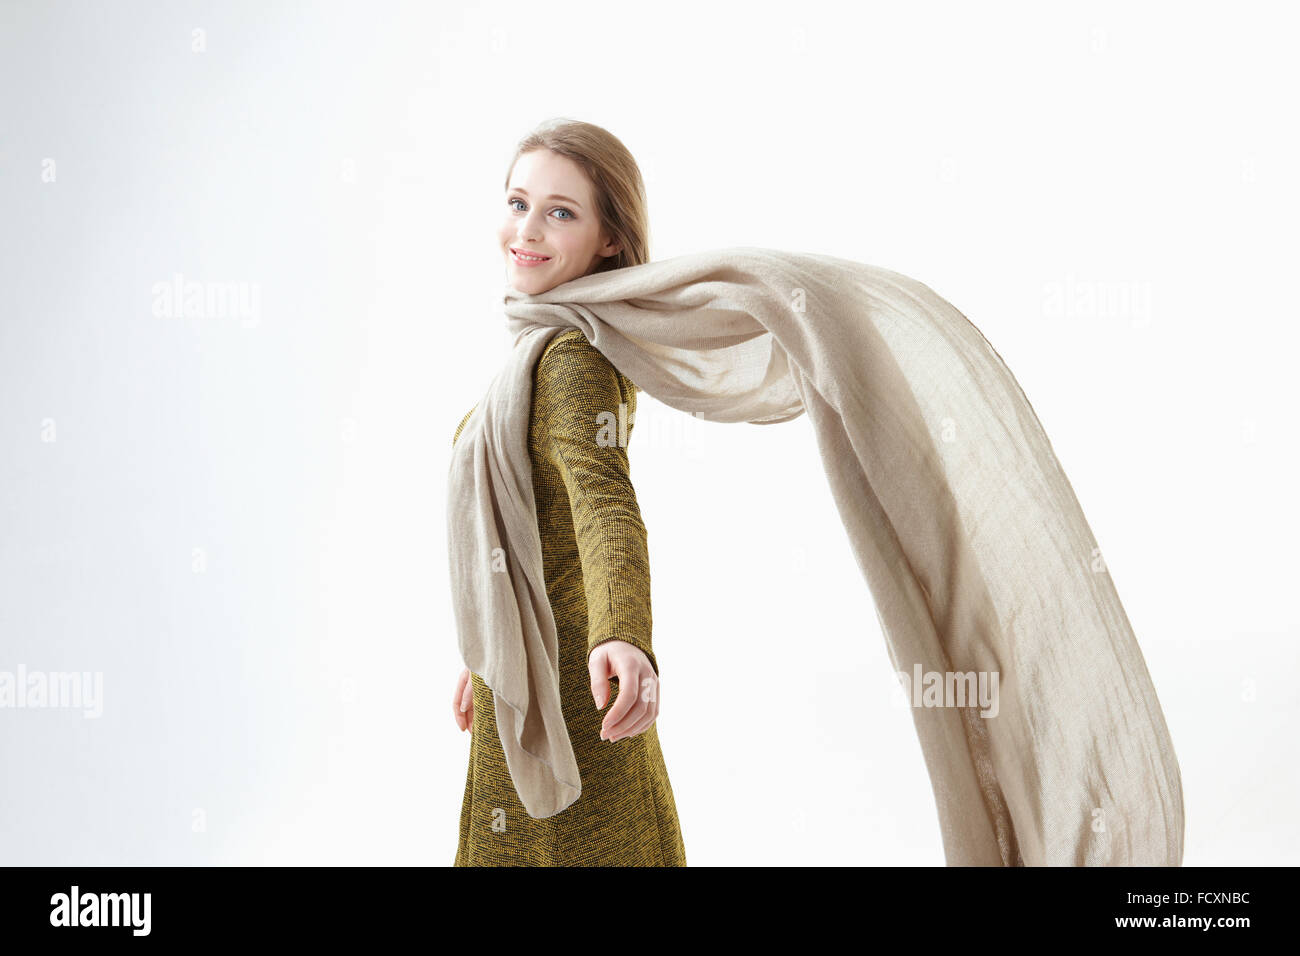 Side view portrait of young smiling woman flapping scarf looking back Stock Photo